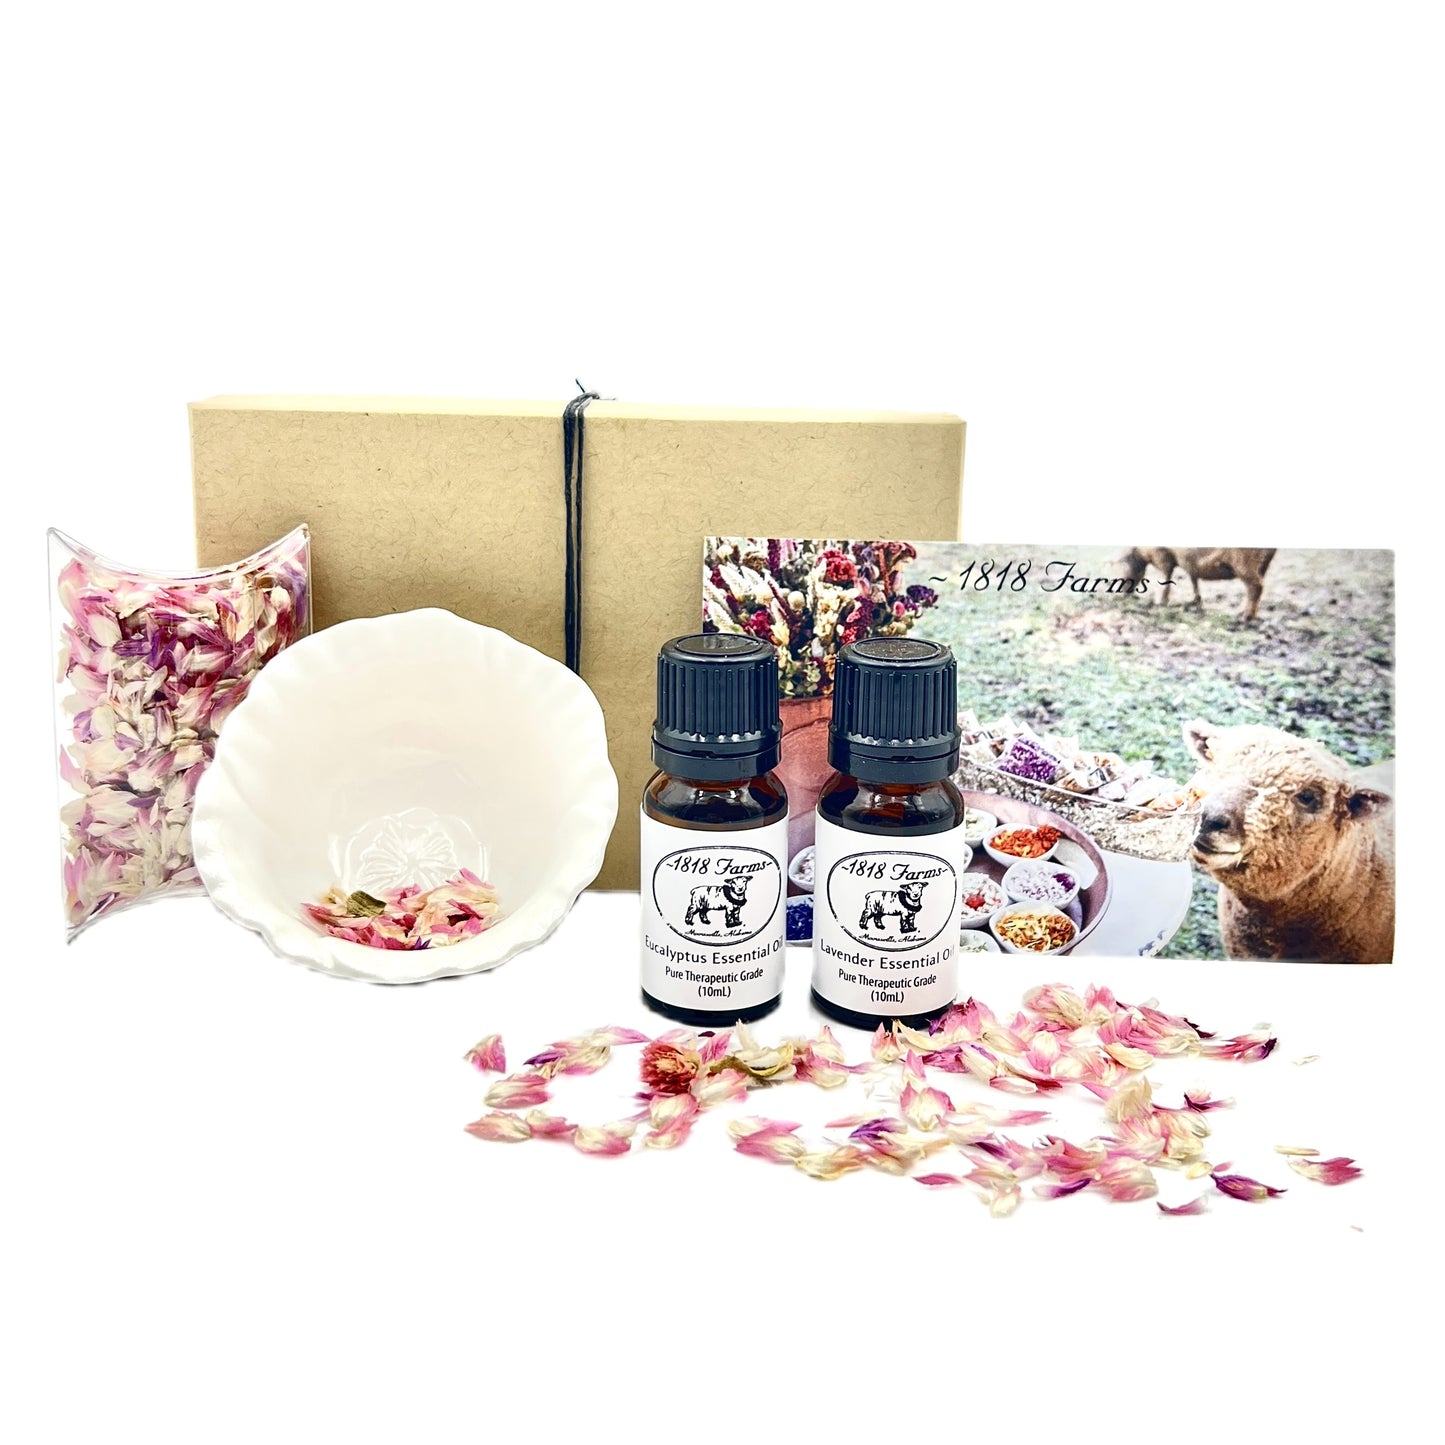 Dried Flower Confetti and Essential Oil Gift Set Gift Basket 1818 Farms   